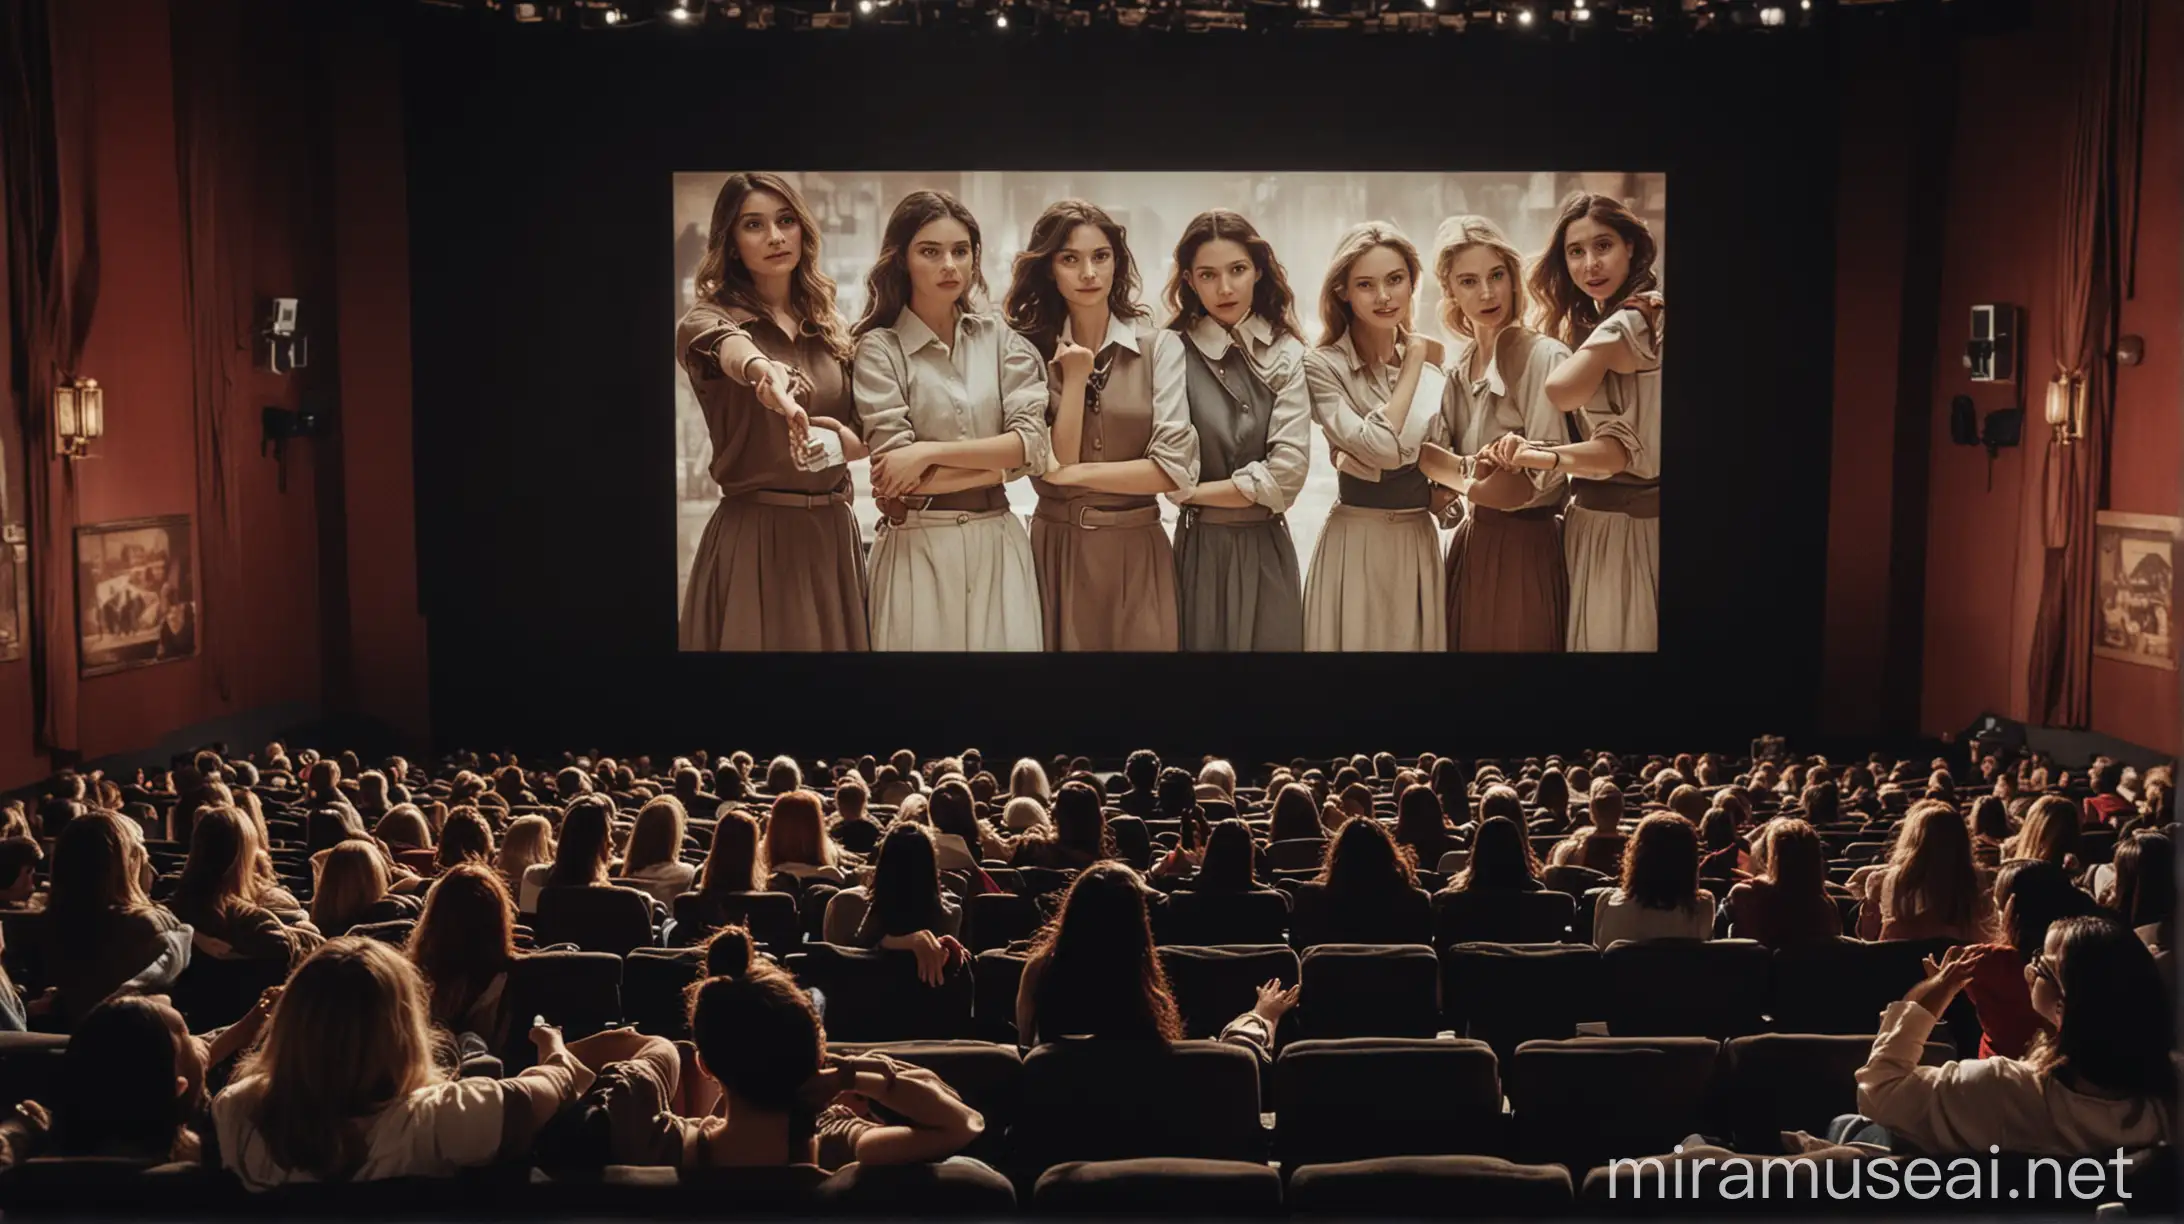 Group of Women Watching Movie in Theatre with Screen Center Stage